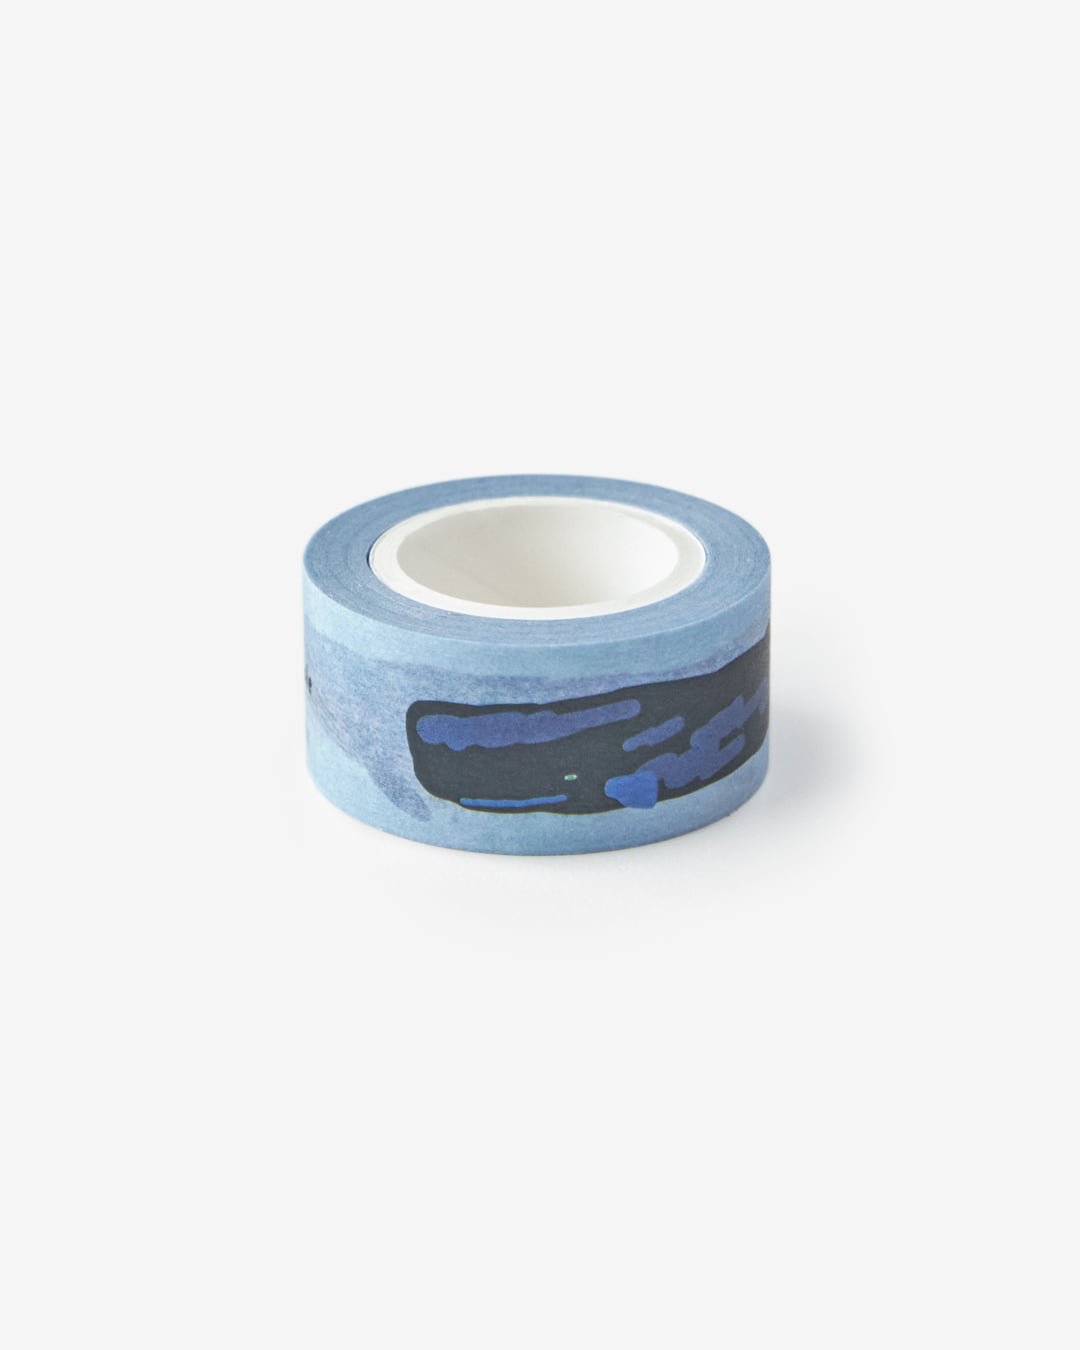 WHALES MASKING TAPE